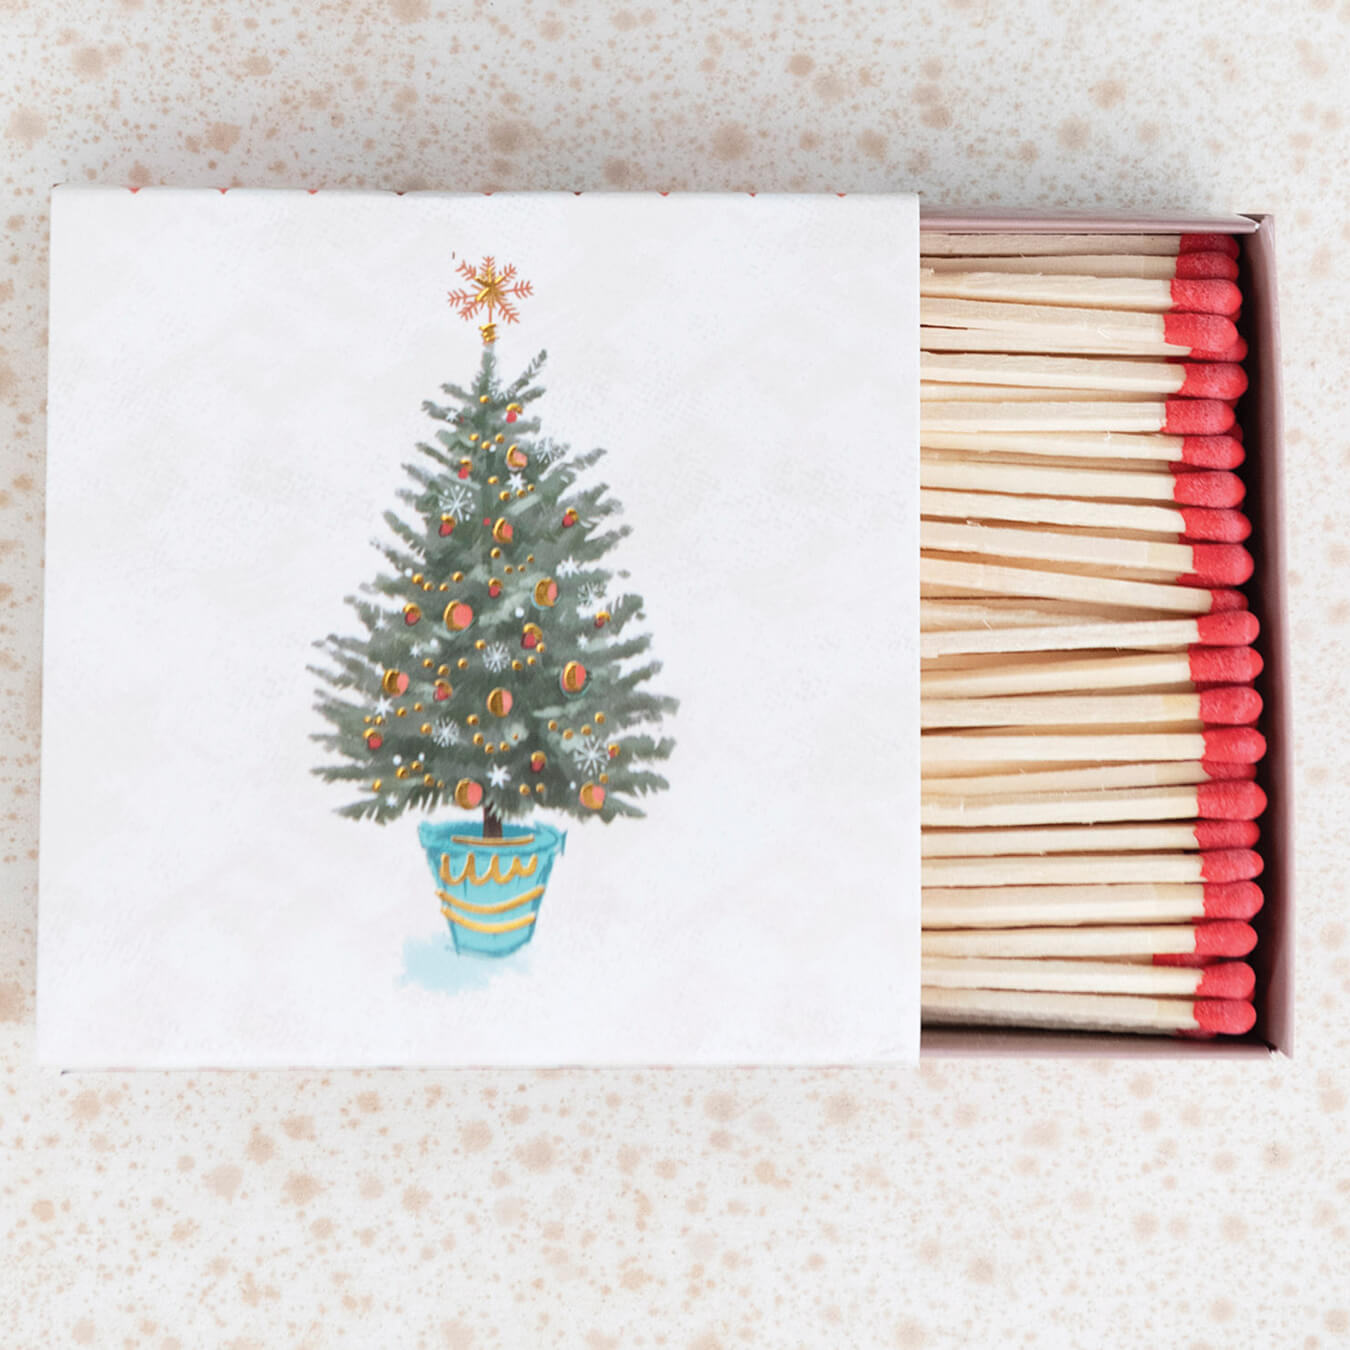 Safety Matches in Matchbox with Potted Christmas Tree